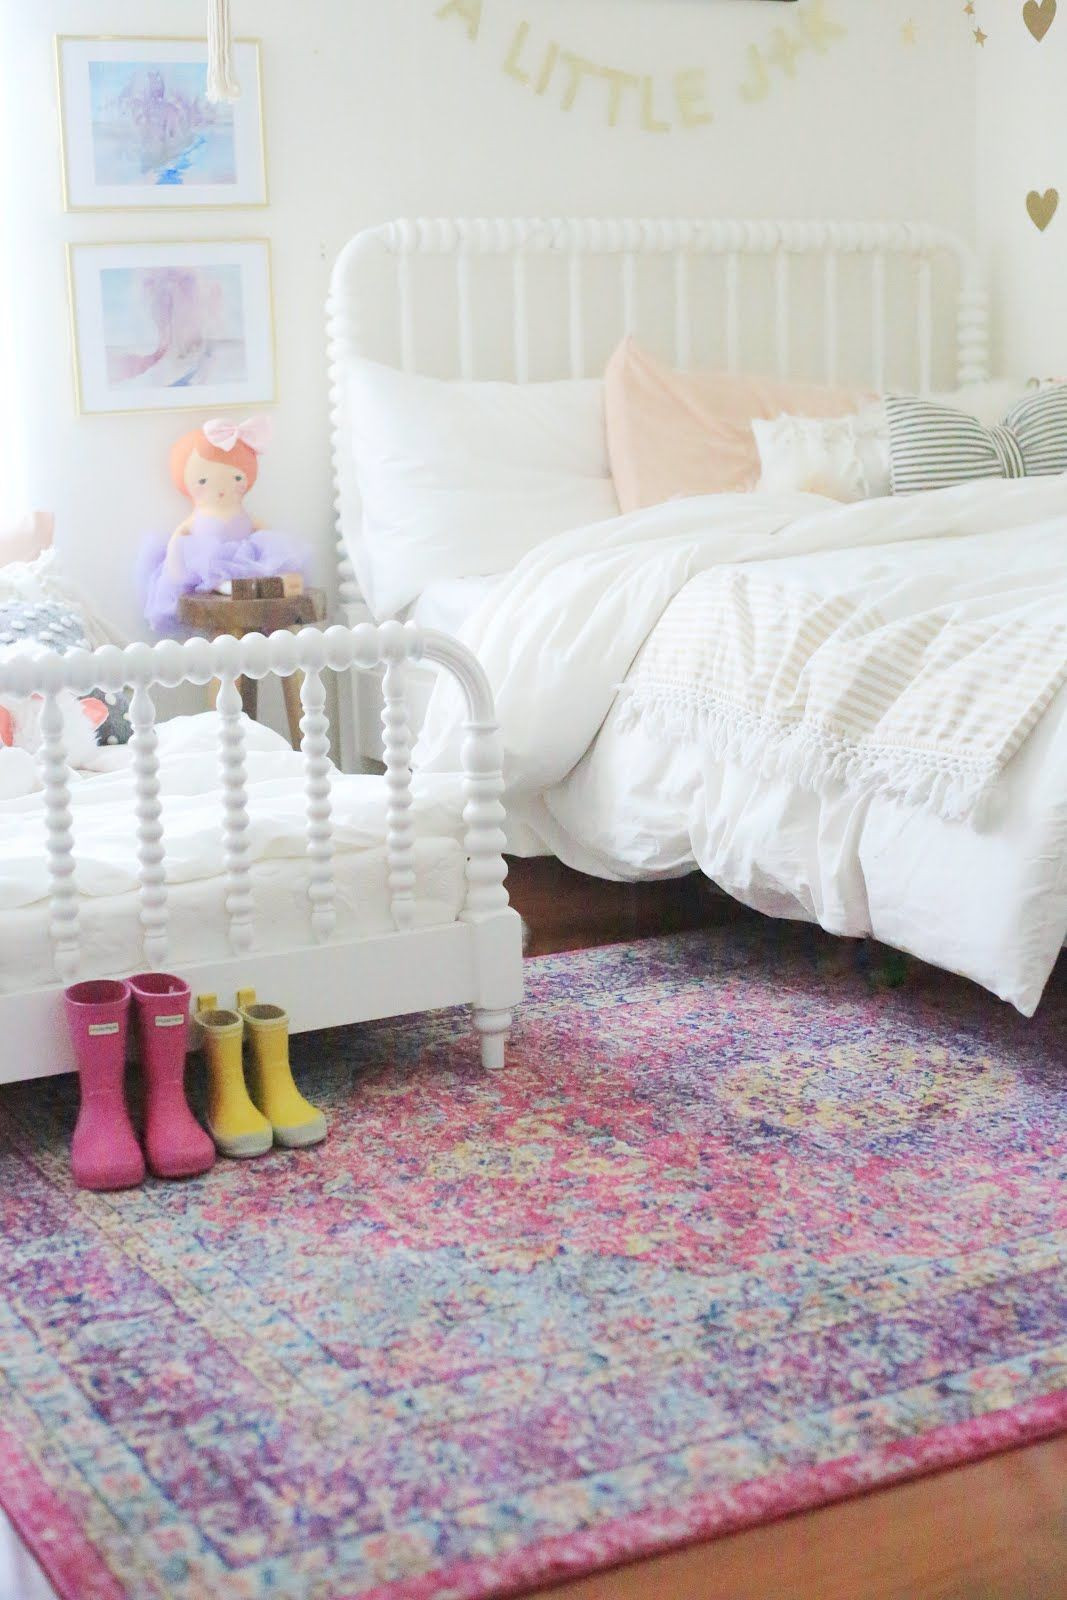 Girls Bedroom Rugs
 So excited to finally share all the details of the girls s